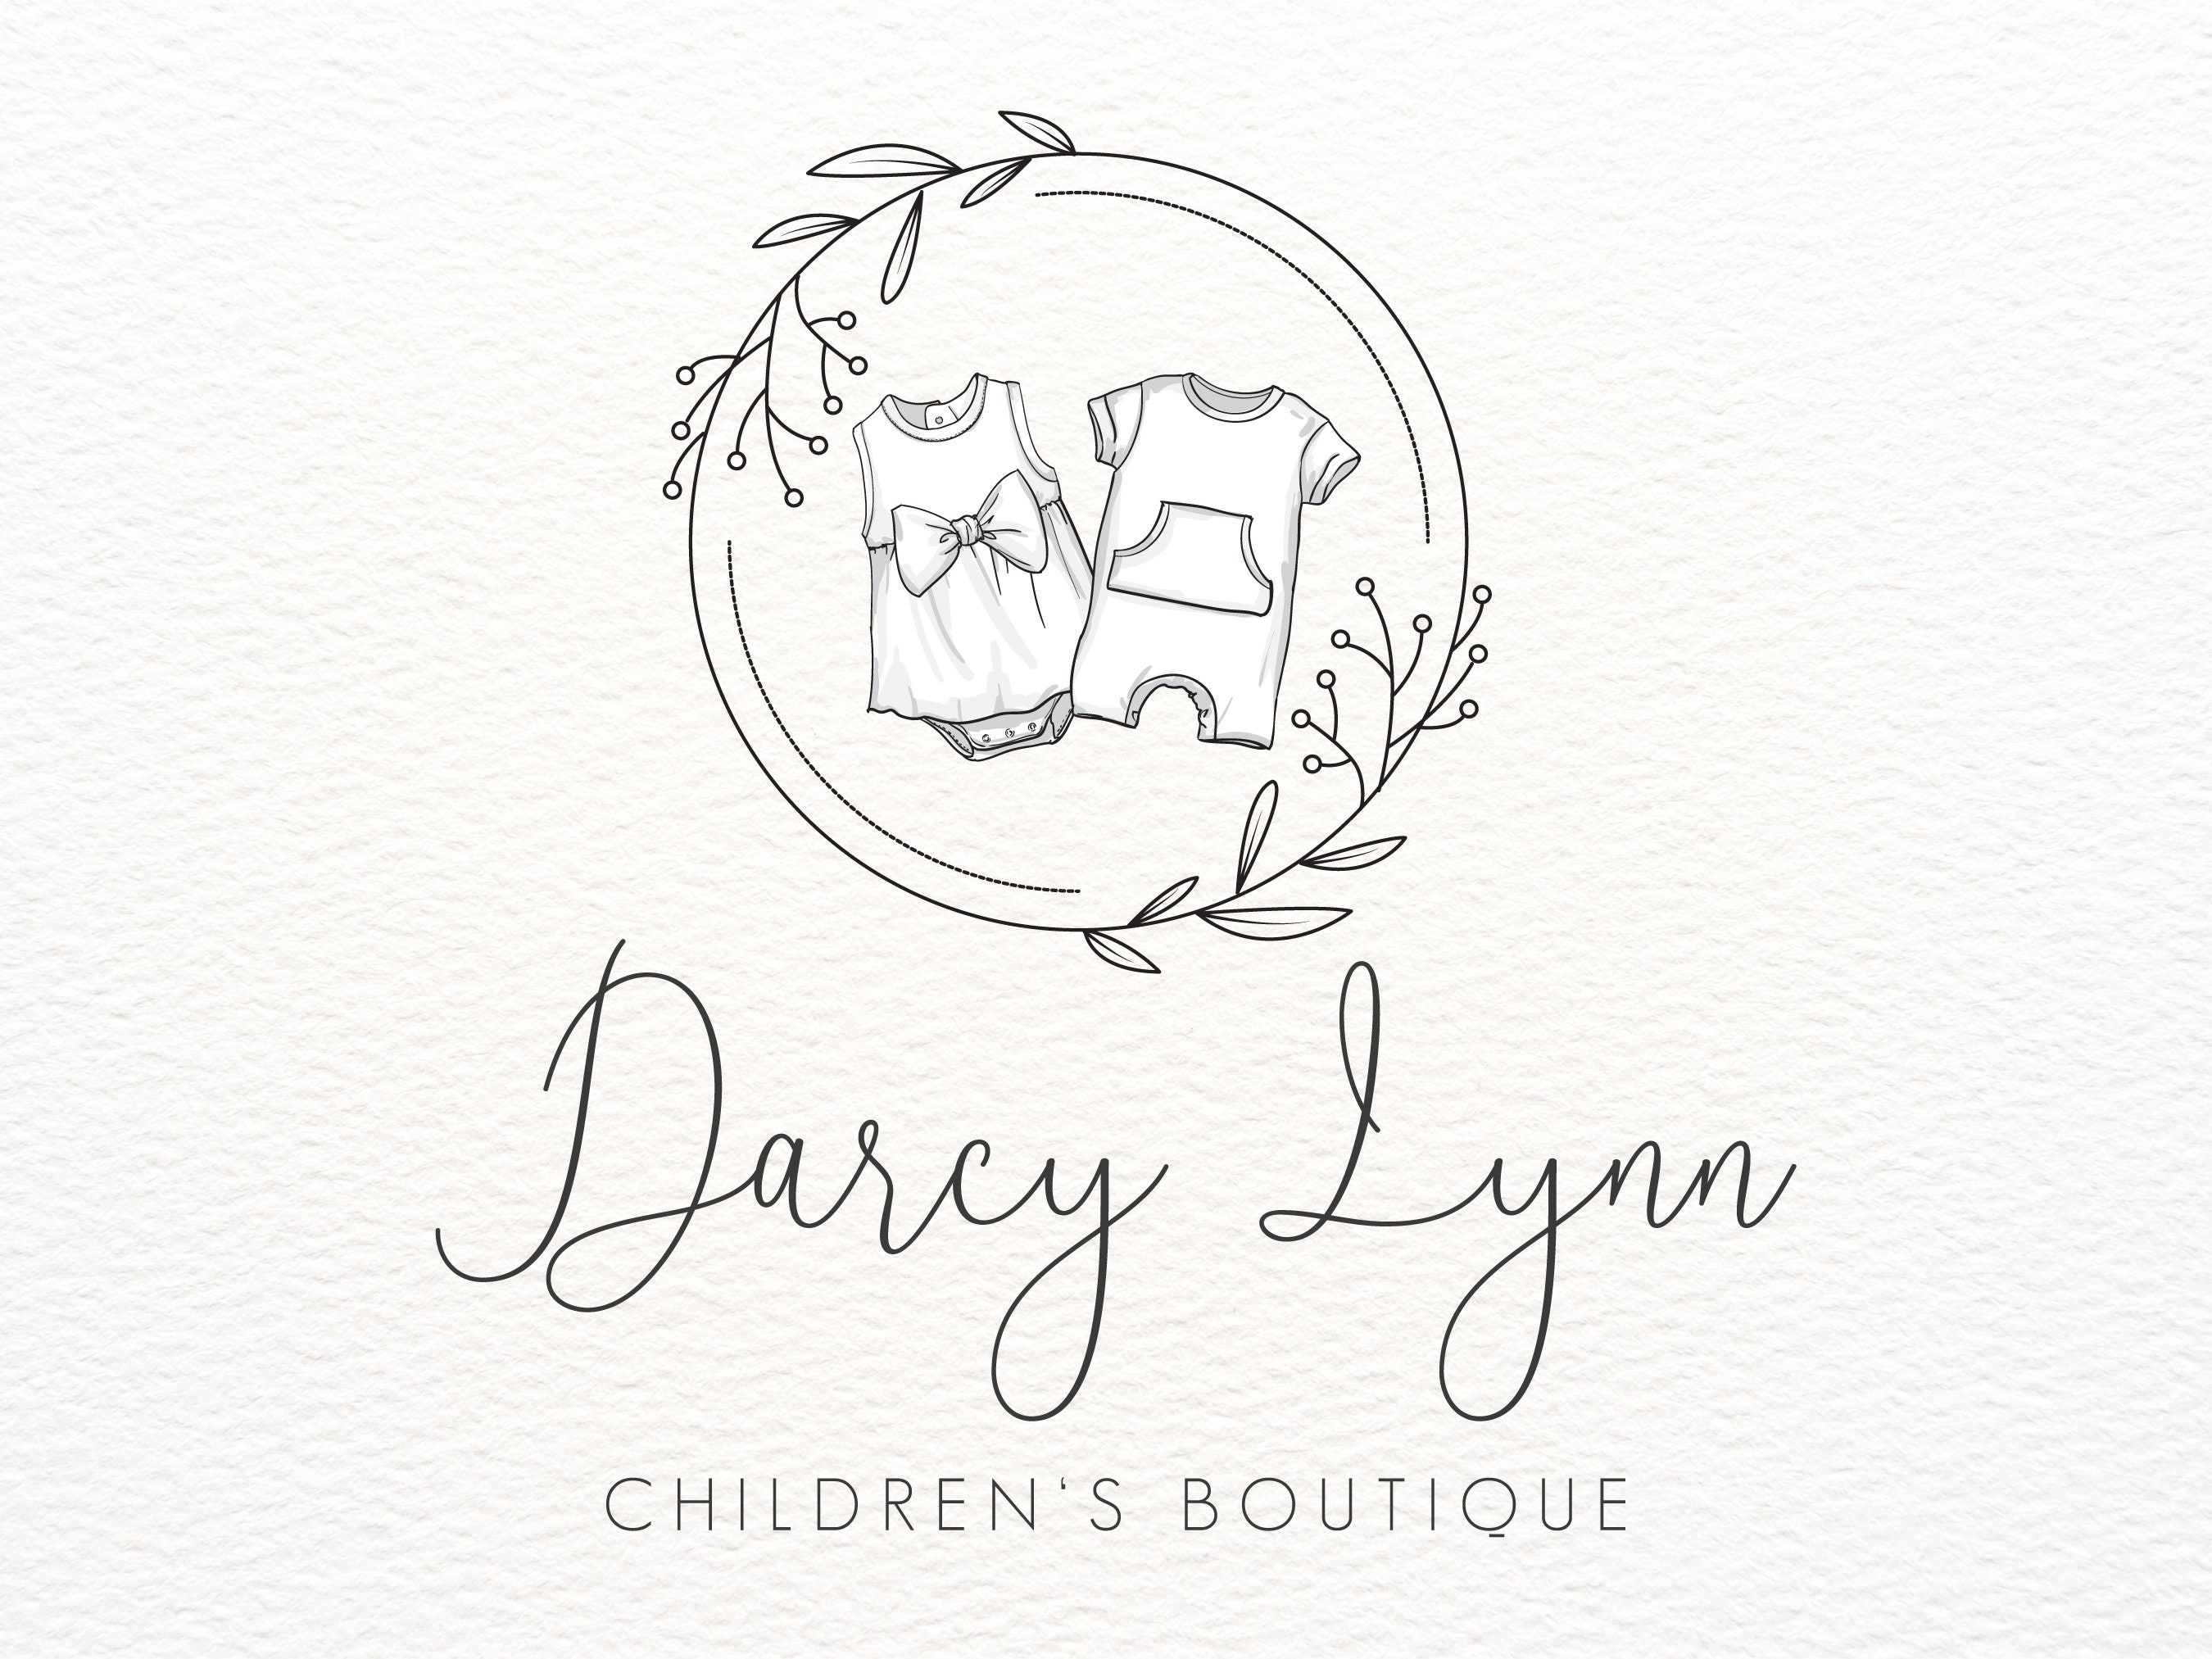 Children's Boutique Logo Design, Girl and Boy Cute Baby Clothes, Watercolor  Kids Outfit Logo, Consignment Store Logo, Digital Branding Kit